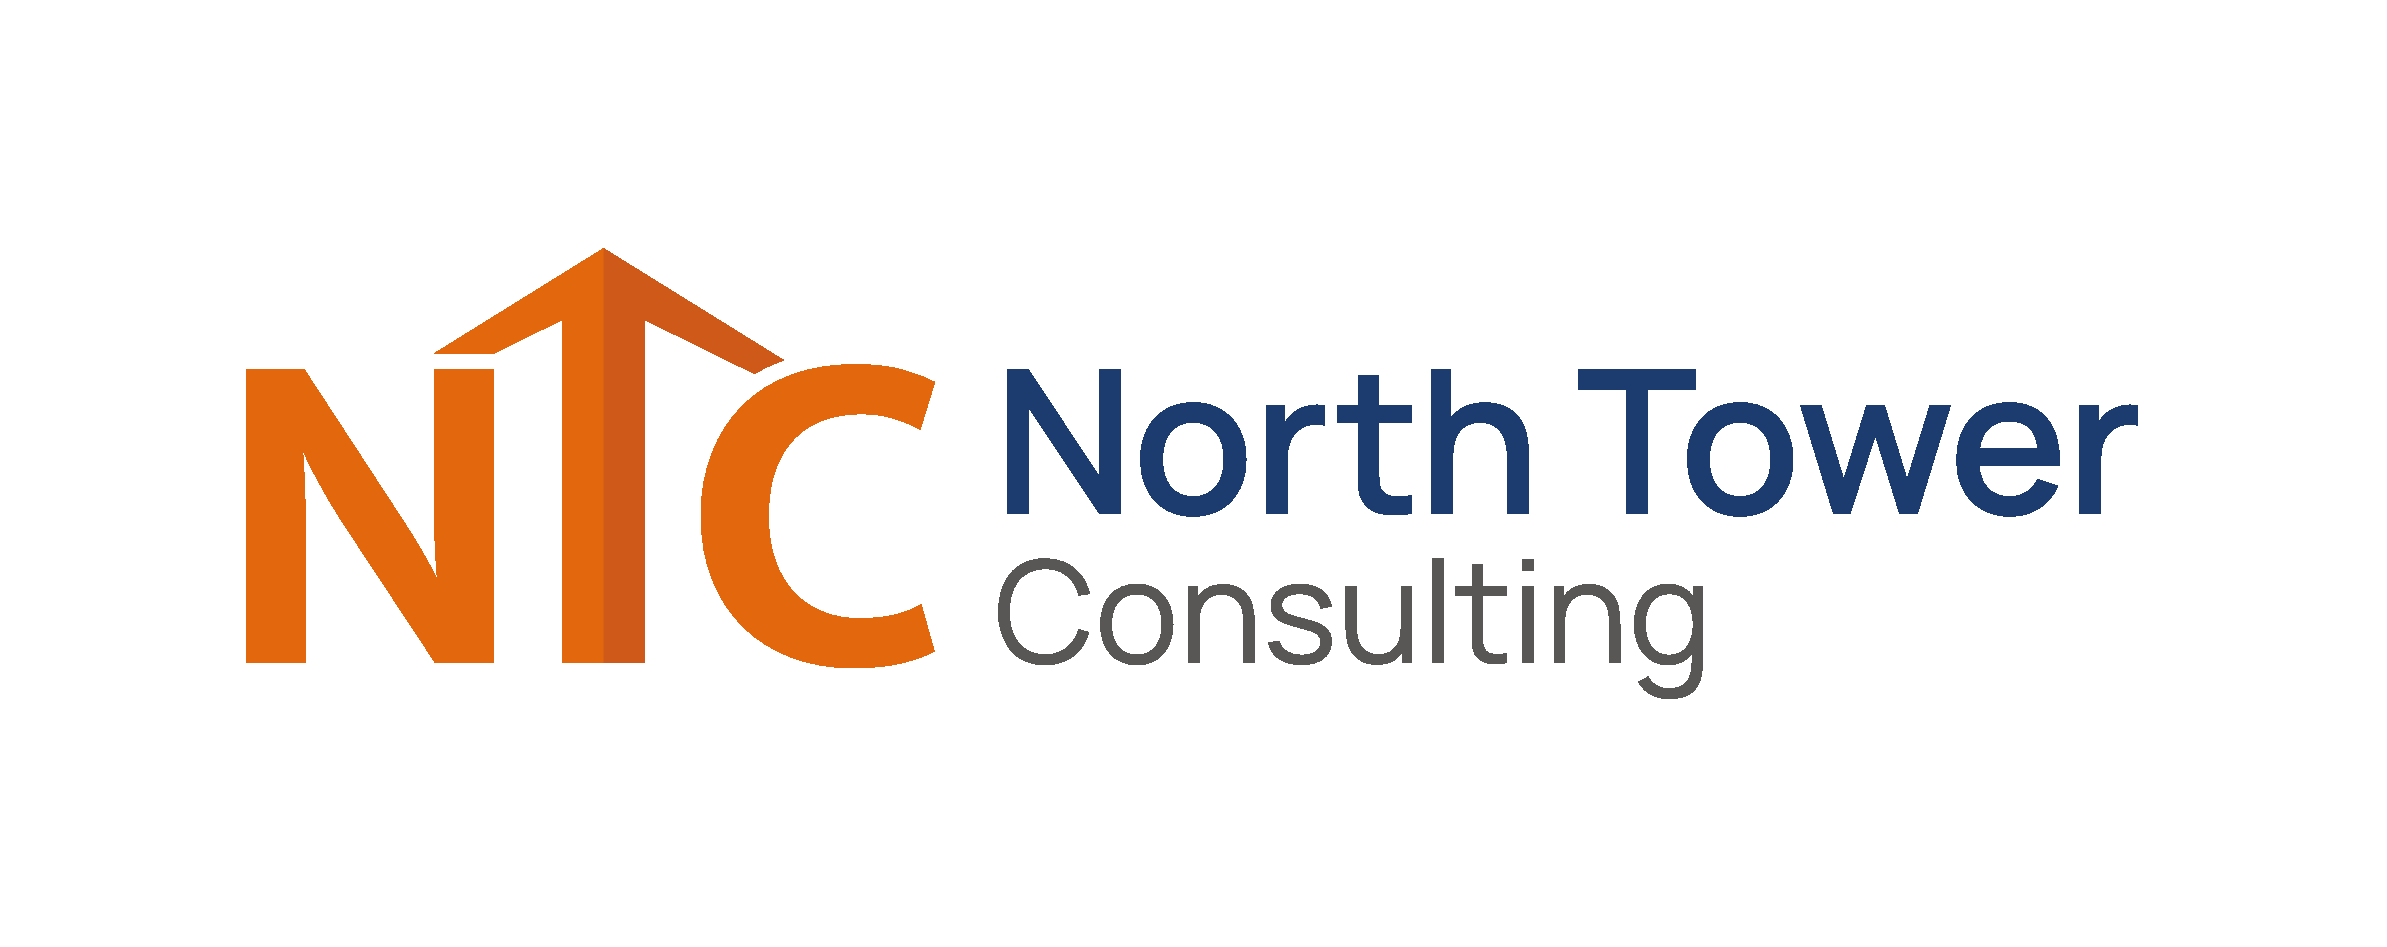 North Tower Consulting 